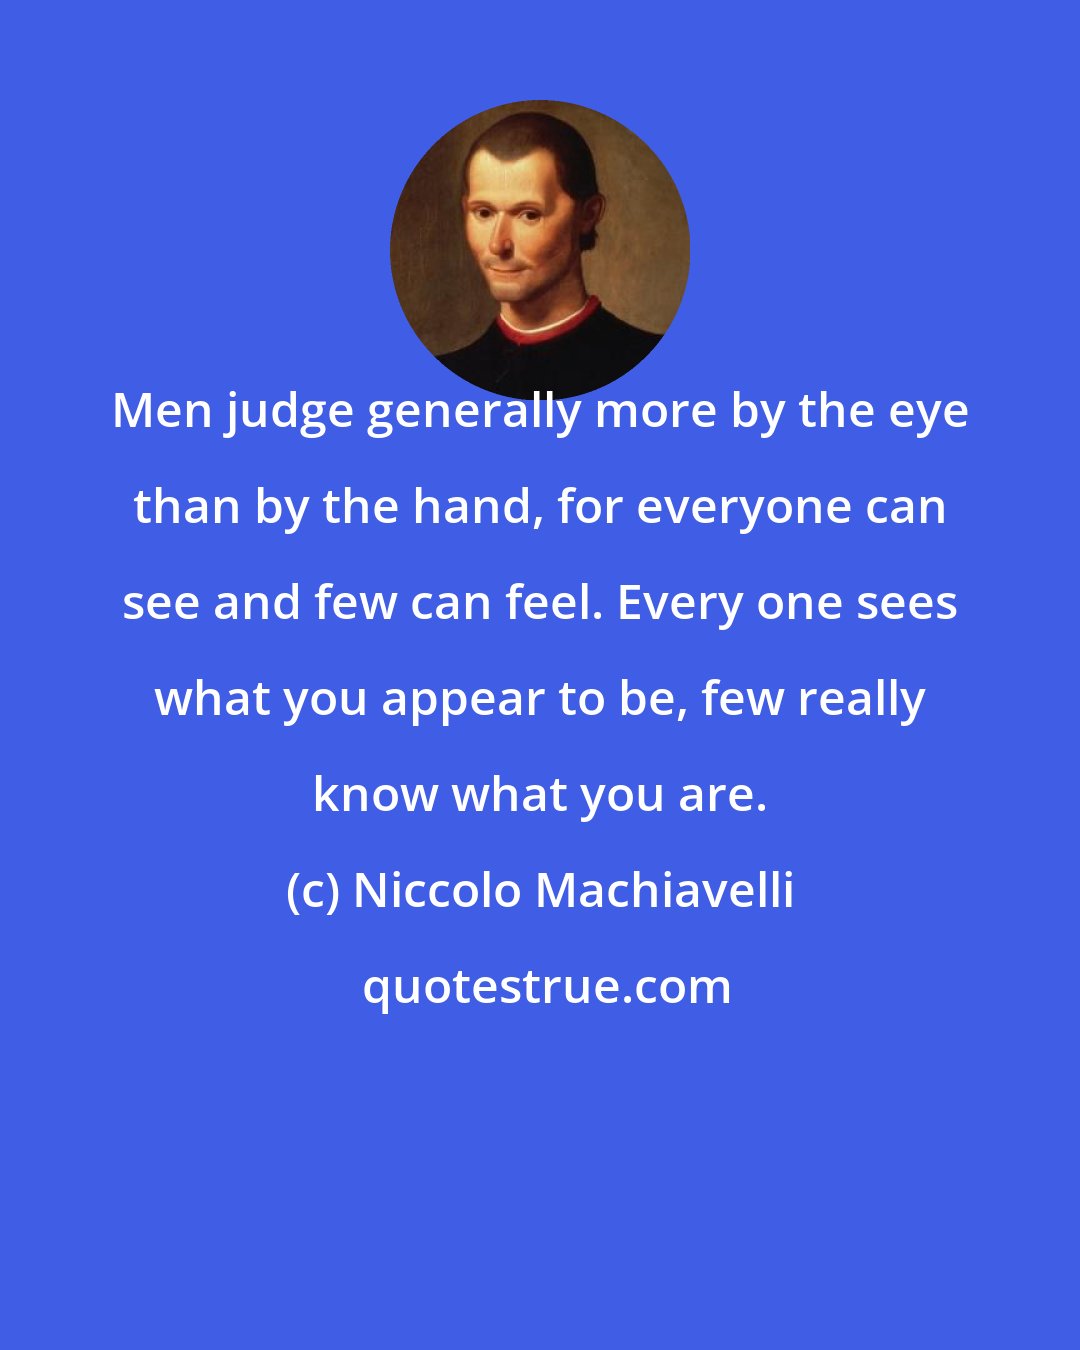 Niccolo Machiavelli: Men judge generally more by the eye than by the hand, for everyone can see and few can feel. Every one sees what you appear to be, few really know what you are.